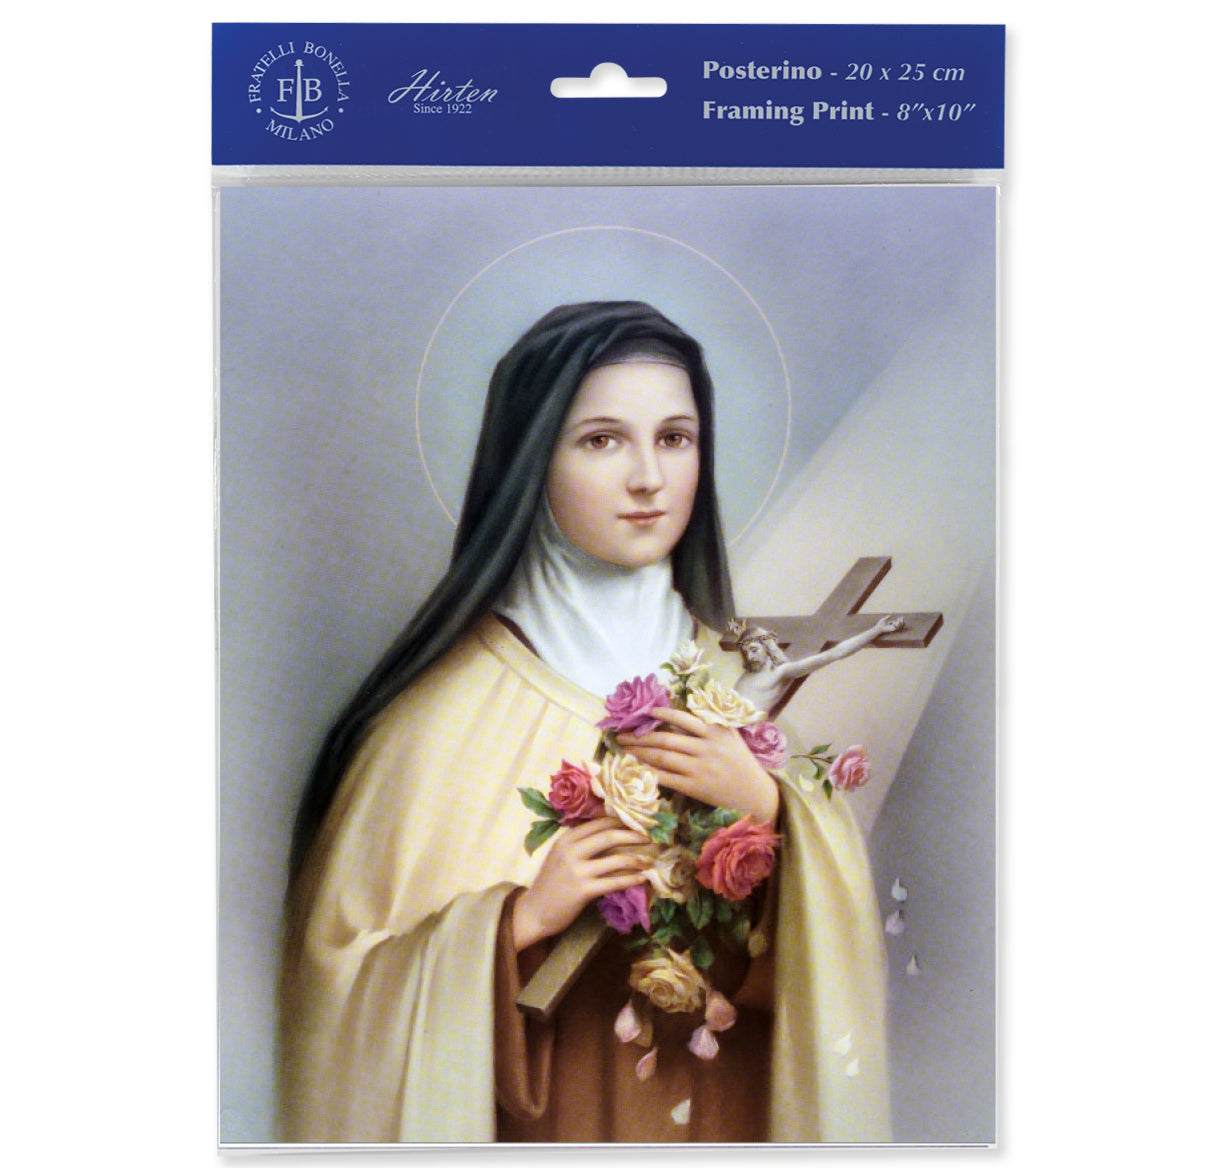 St. Therese Print